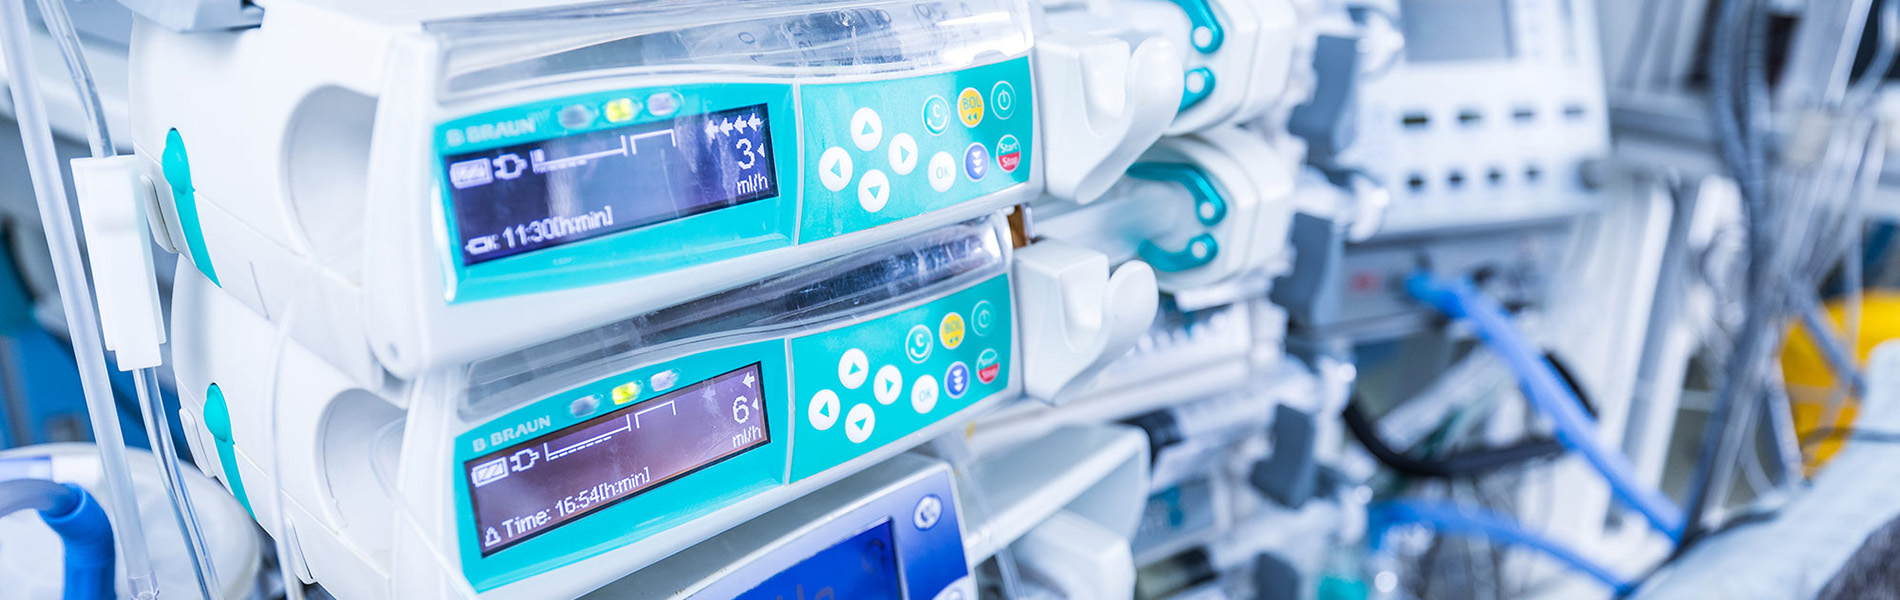 Advanced medical infusion pumps with digital displays from Paragon ID, highlighting precision in patient care